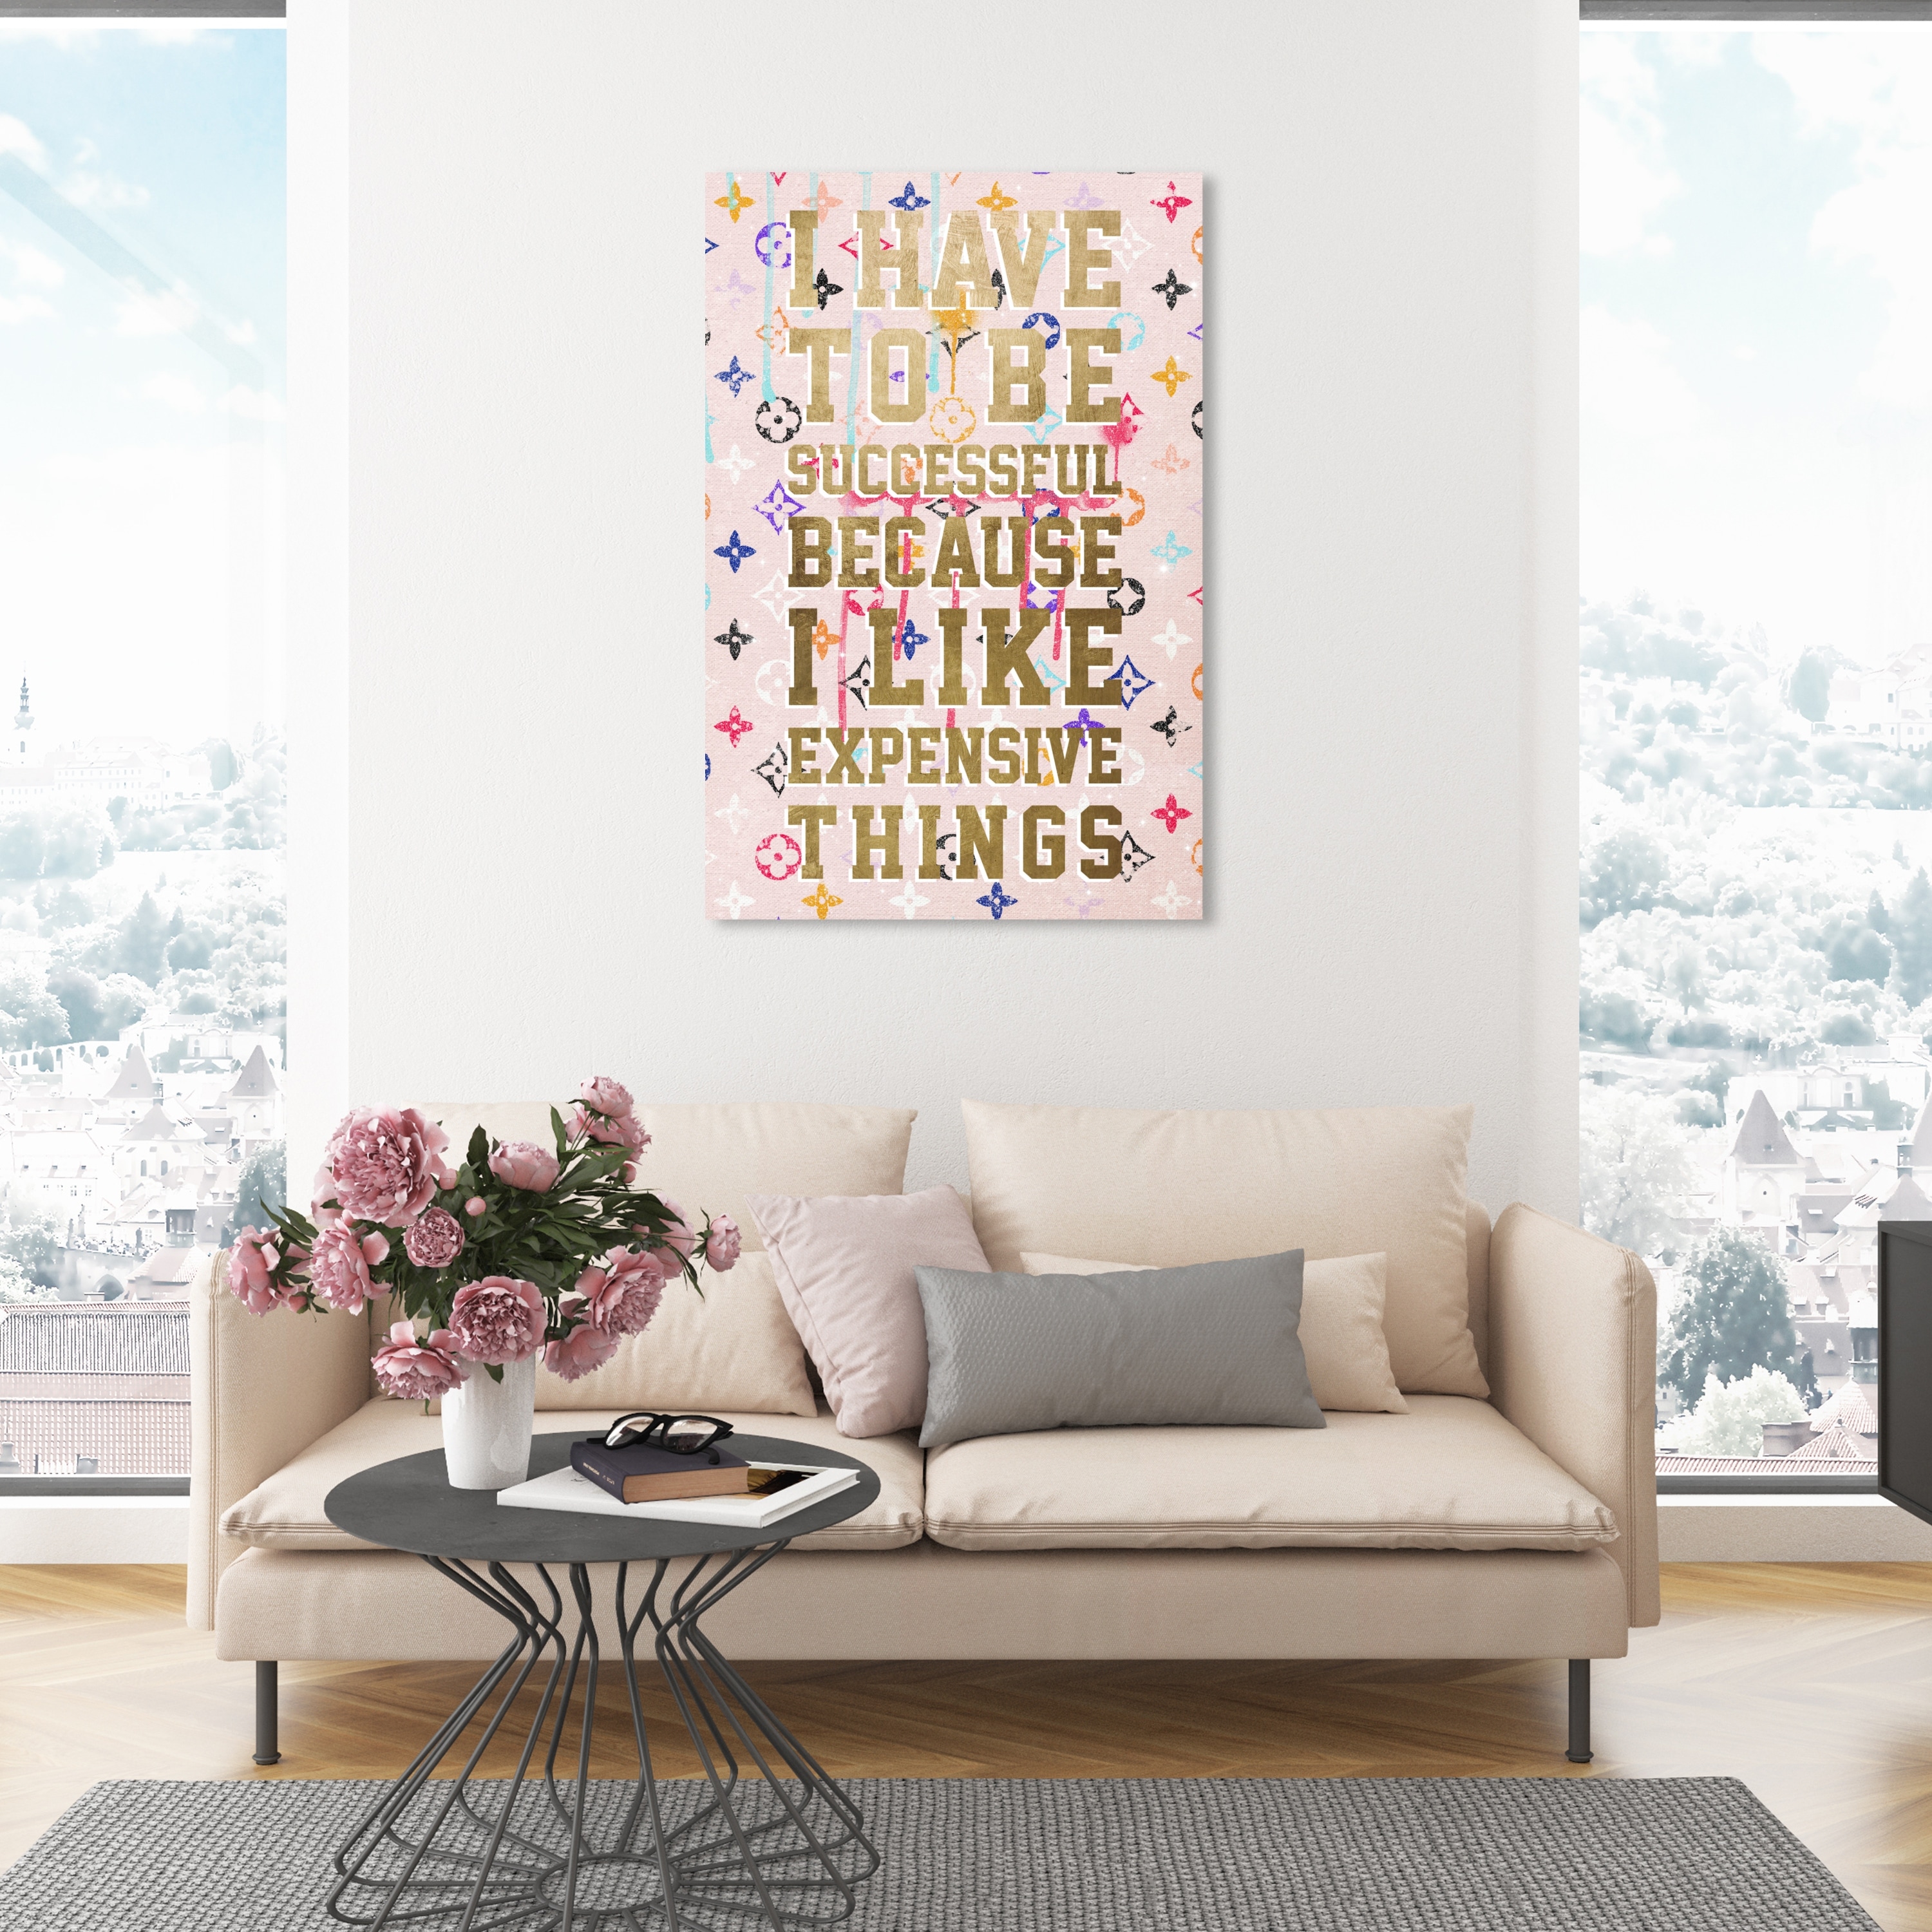 Oliver Gal 'Expensive Things Graffiti' Typography and Quotes Wall Art Canvas Print Funny Quotes and Sayings - Gold, Pink - 36 x 54